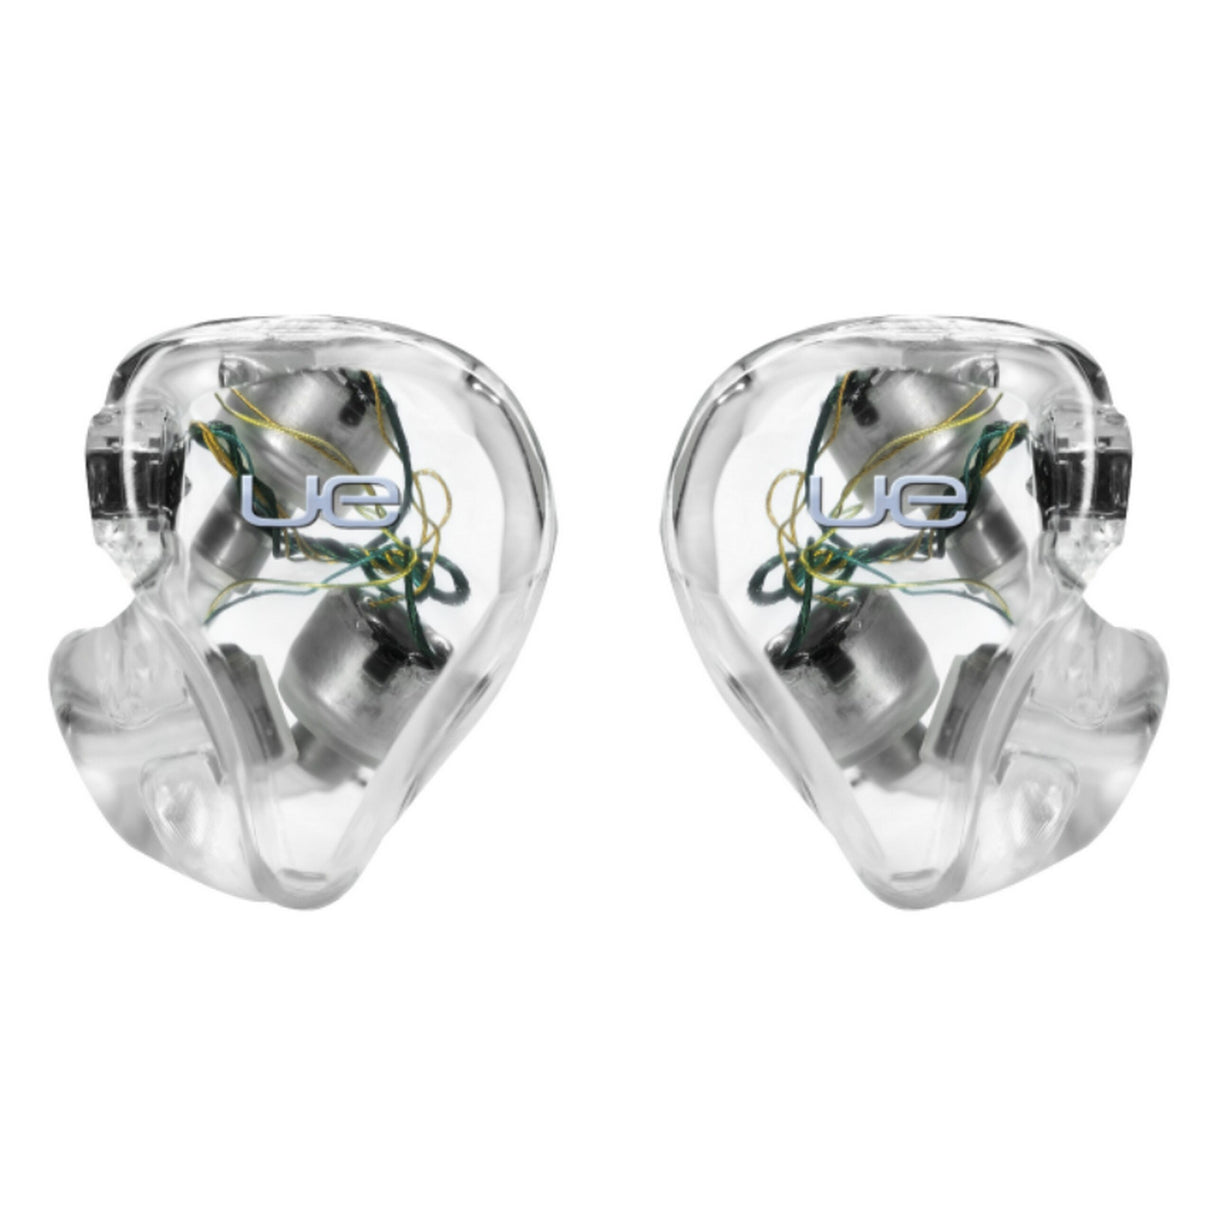 Ultimate Ears UE6 PRO In-Ear Monitor with Universal Tips, Clear